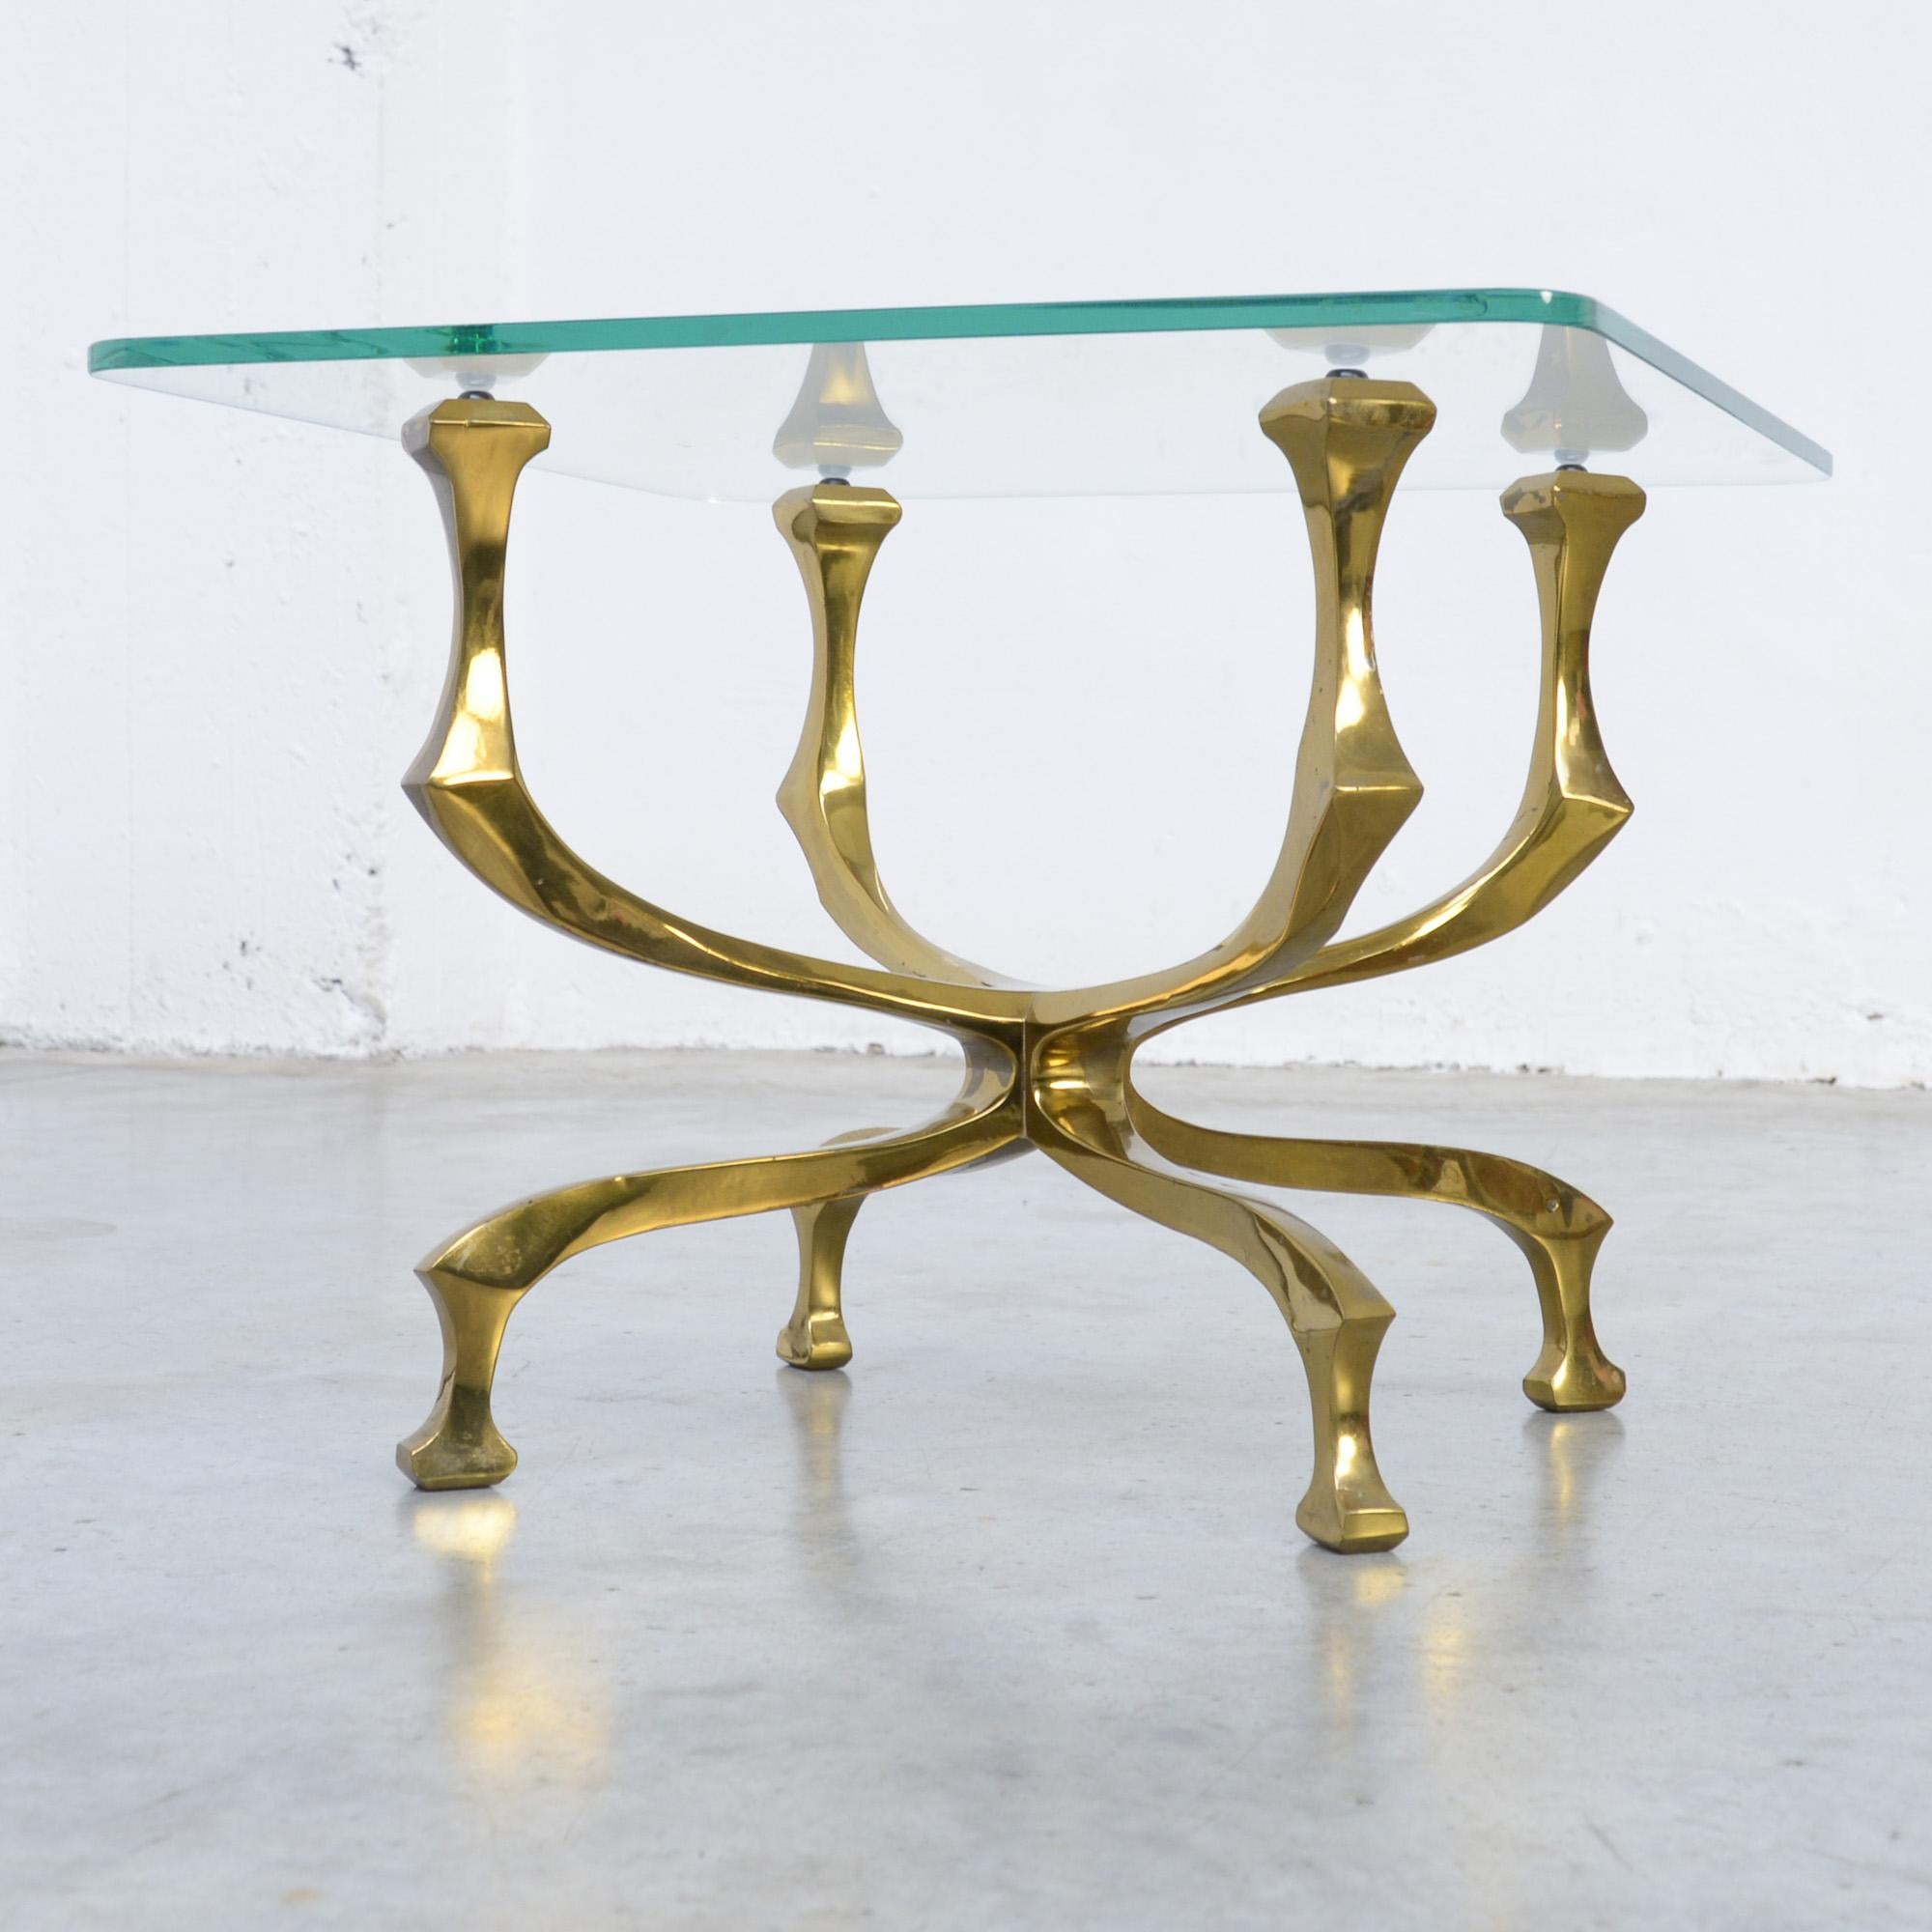 This stylish side or coffee table was created by Willy Daro in the 1970s.
The crystal glass top rests on the artistically made bronze base is. The table is signed by the artist and in very good condition. The original glass top has some minor